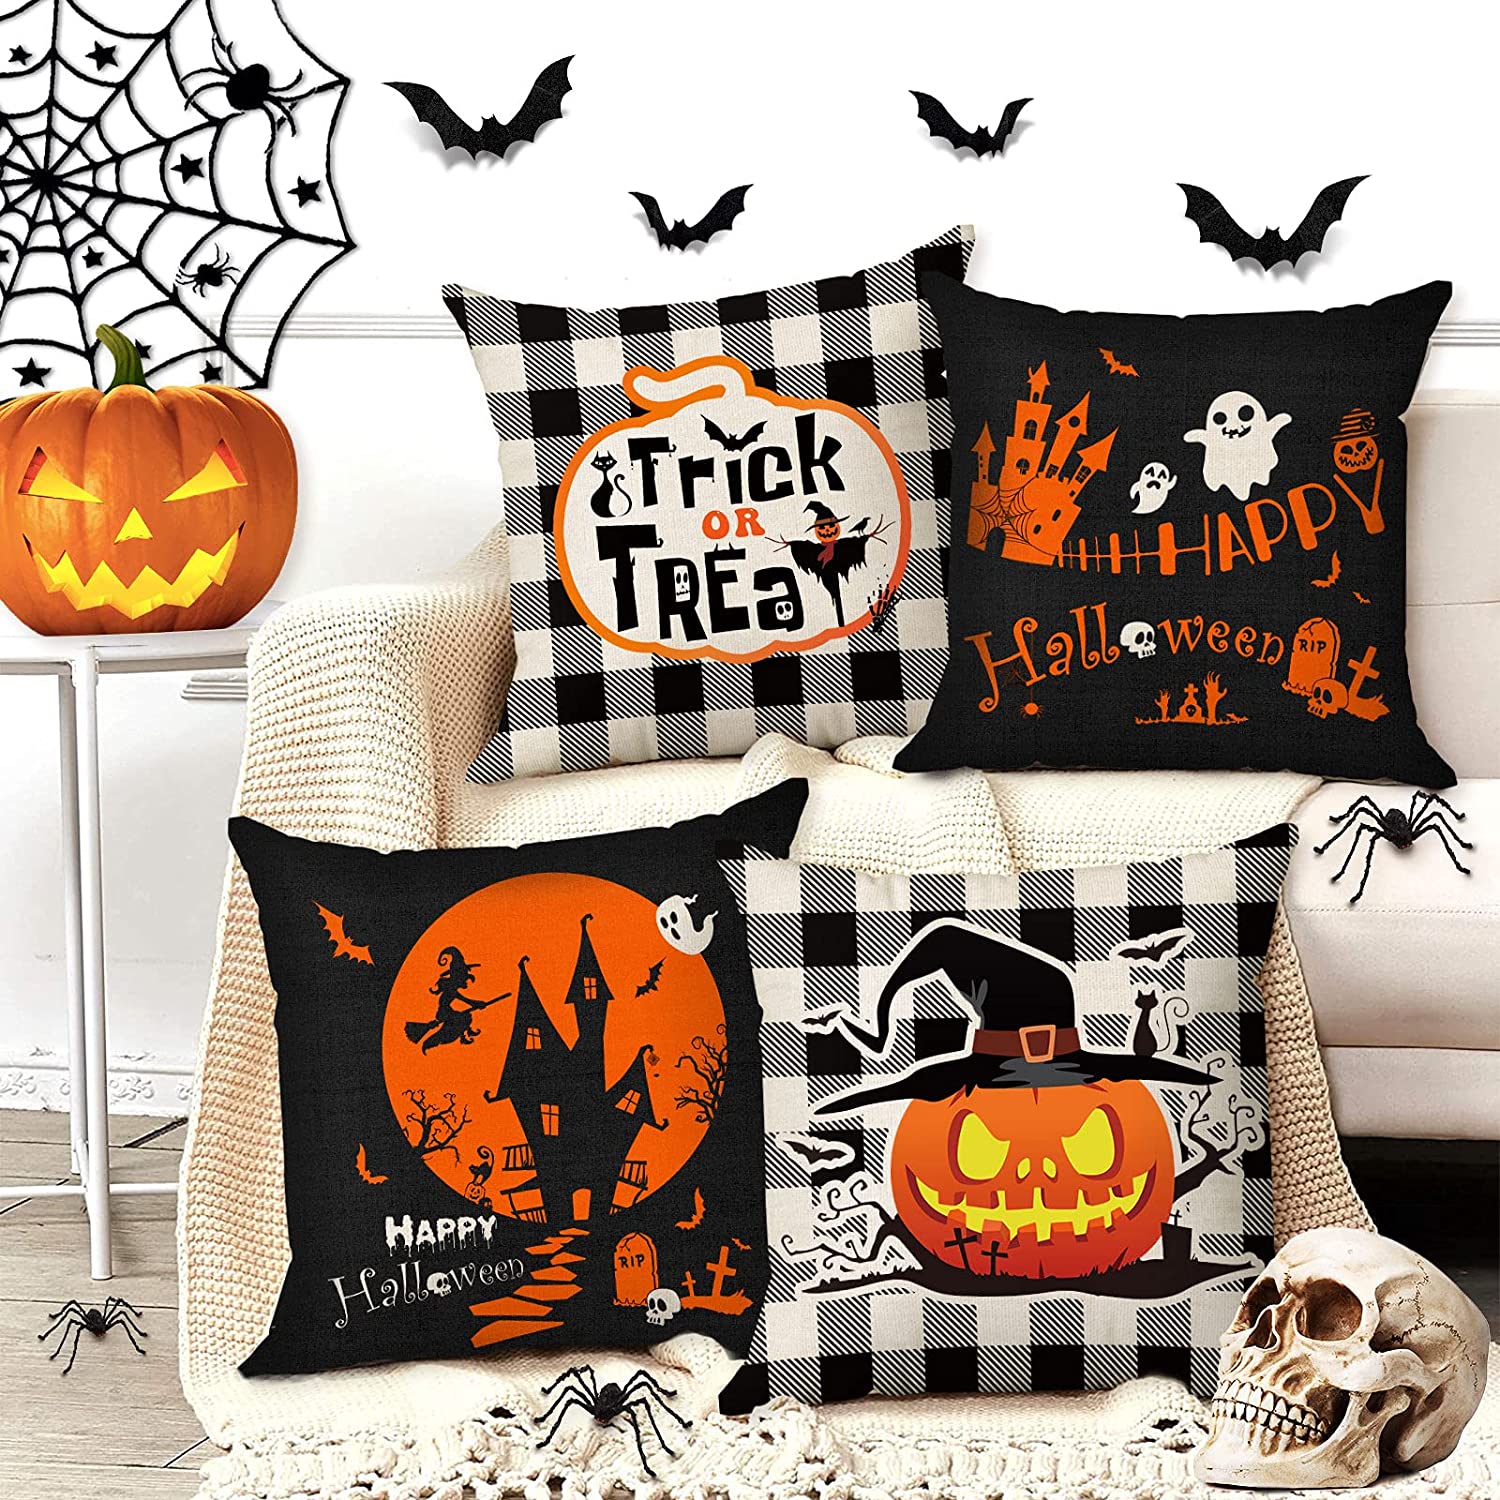 Halloween Pillow Covers 18x18 inch Set of 4 Trick or Treat Pumpkin Pillow Covers Holiday Rustic Linen Pillow Case for Sofa Couch Halloween Decorations